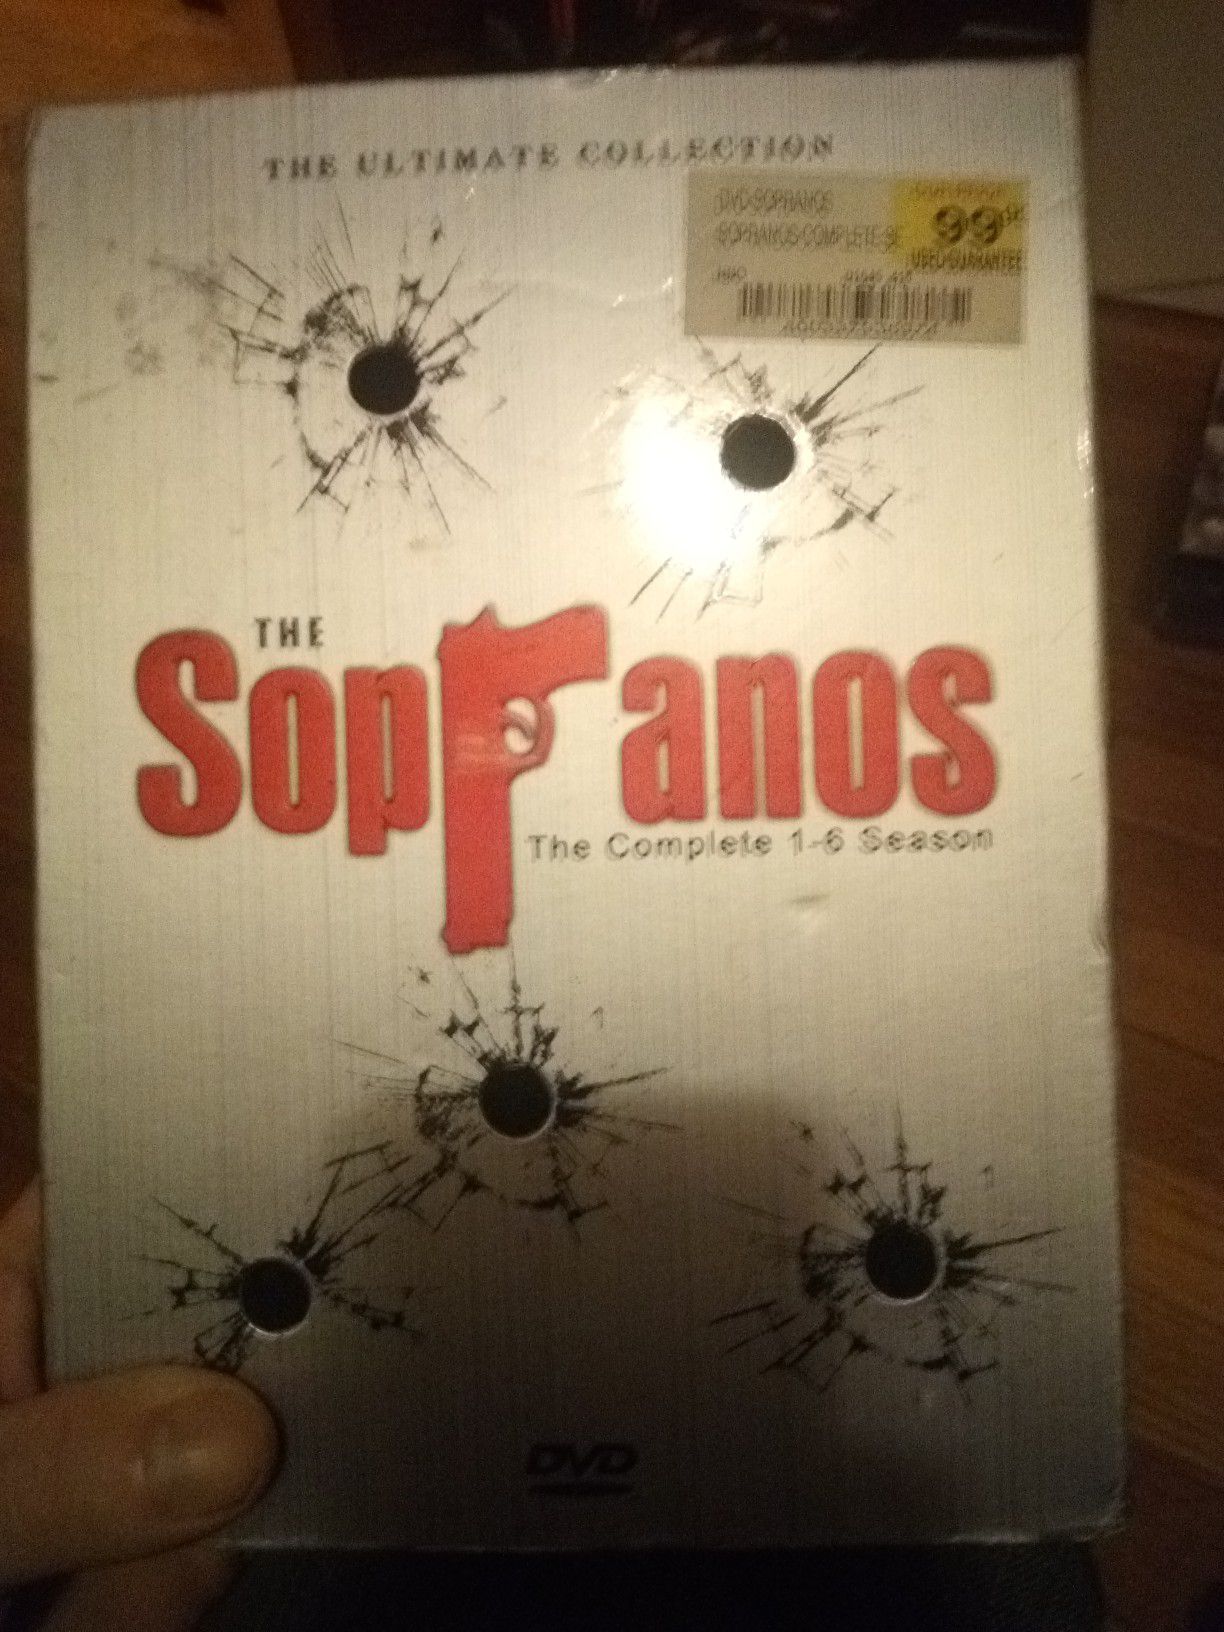 Sopranos the Ultimate Collection Box Set DVDs